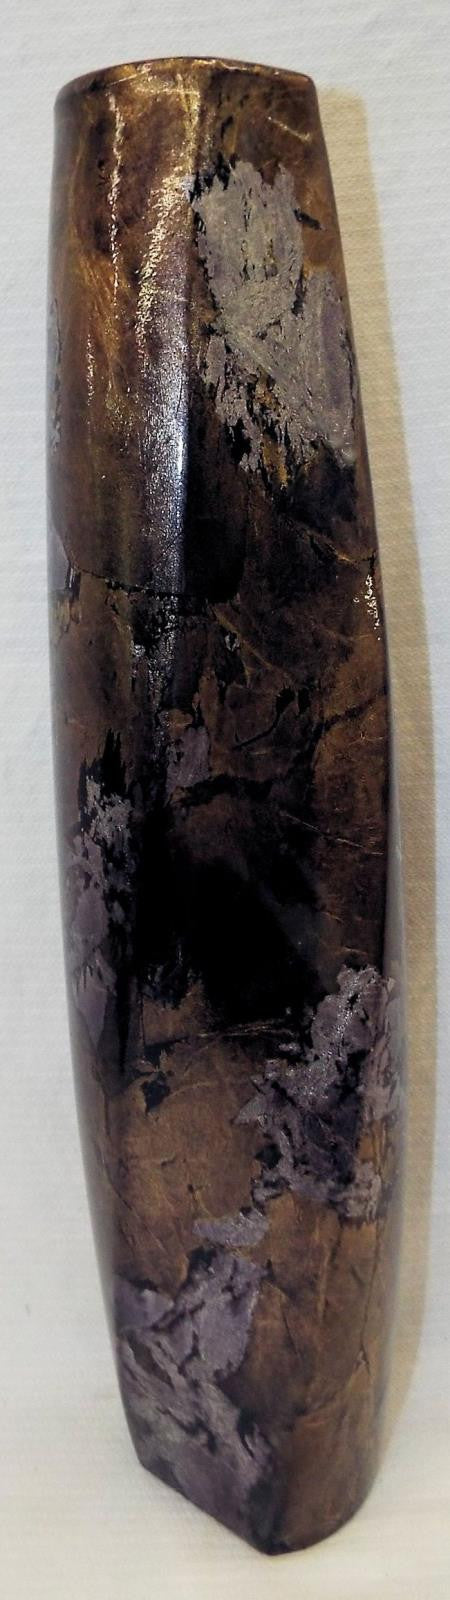 Studio Ceramic Vase, Body Was Round In Shape, After Forming End Result - Roadshow Collectibles